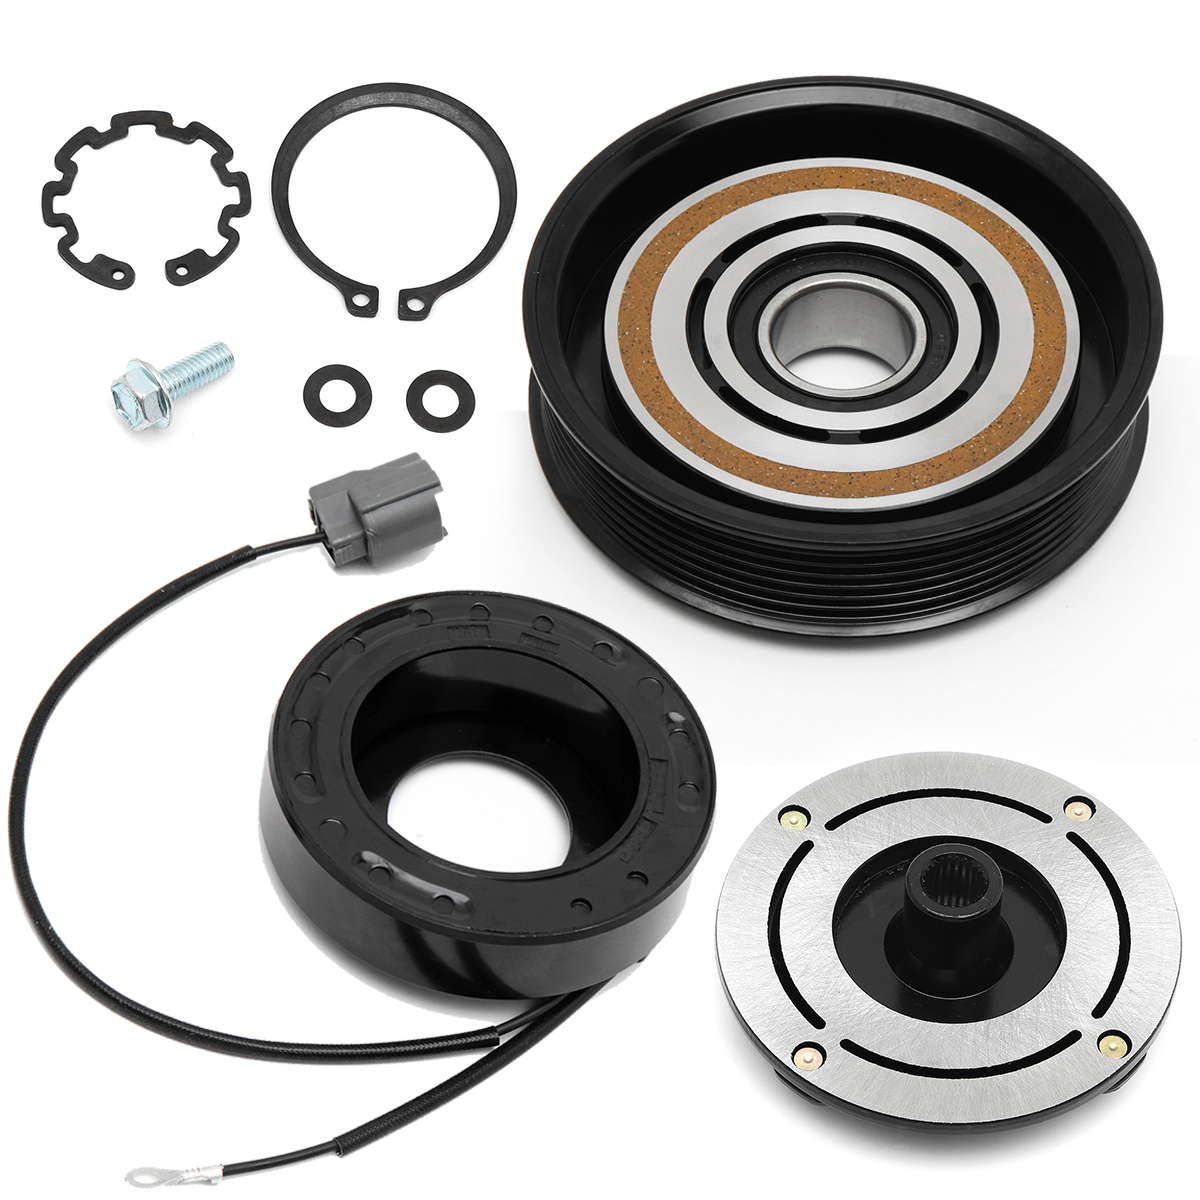 

AC A/C Compressor Clutch Kit For Acura MDX TL Pulley Coil Bearing Accessories